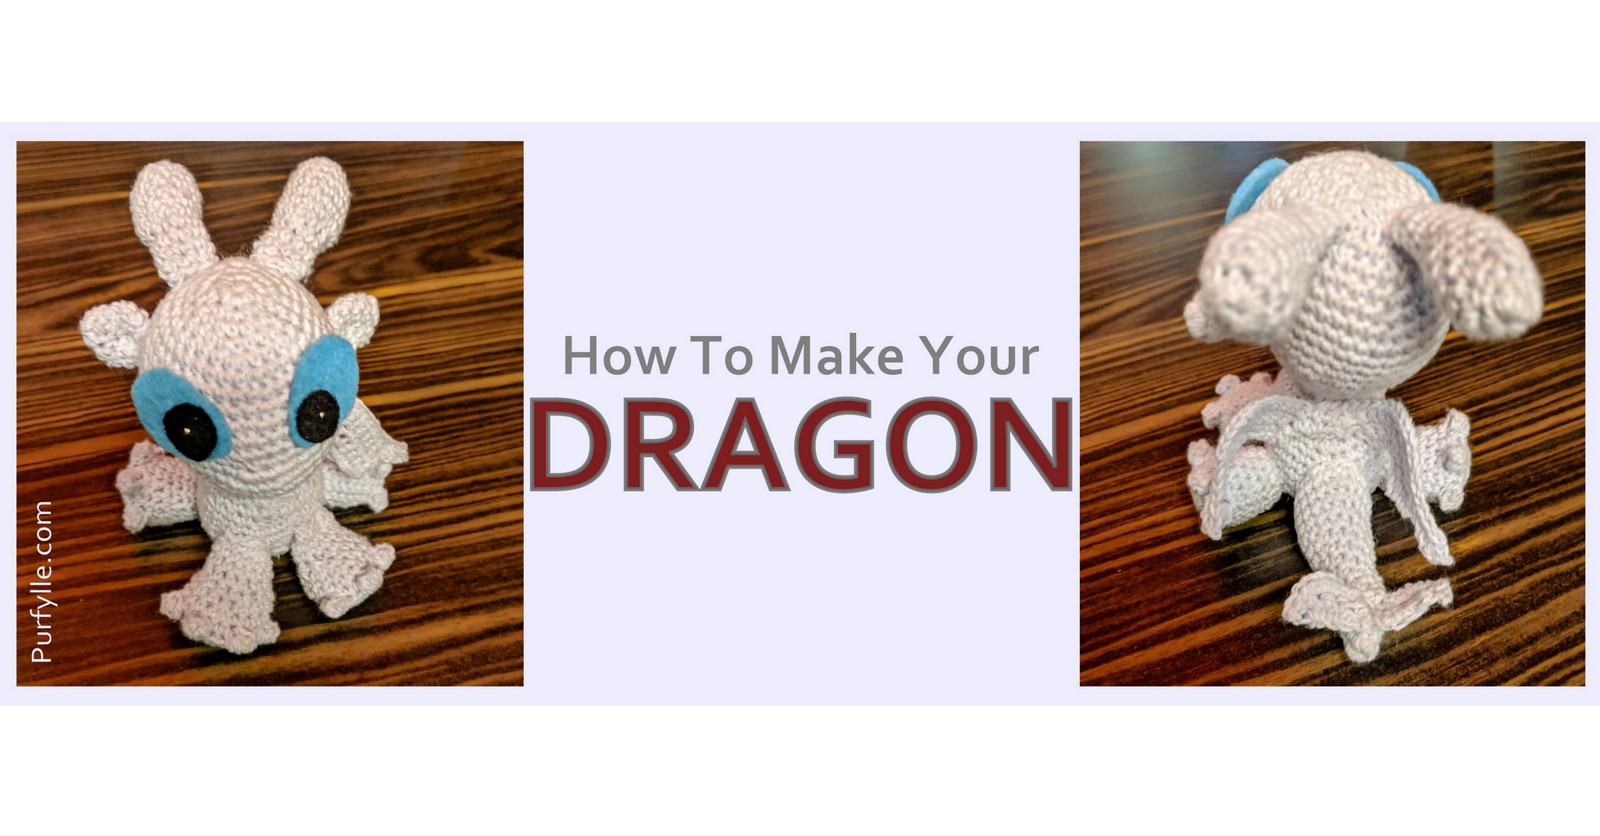 How To Make Your Dragon